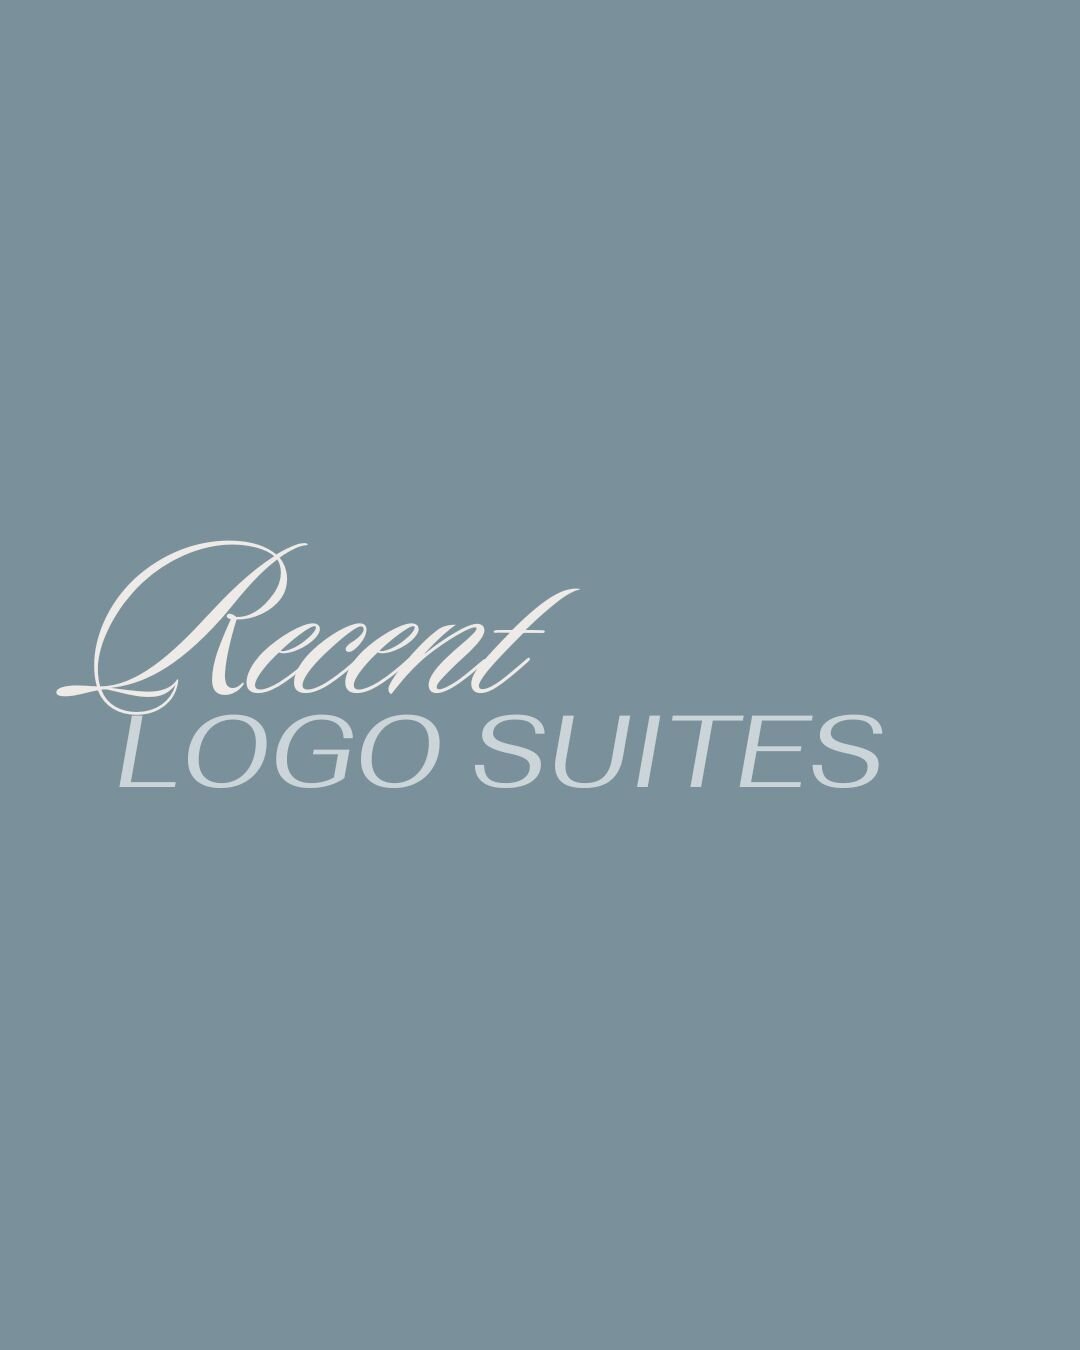 Discover the power of branding with our latest logo suites. Each design tells a unique story🥰 Let us design yours! 

#logosuites #logodesign #graphicdesign #madmarketing #digitalmarketing